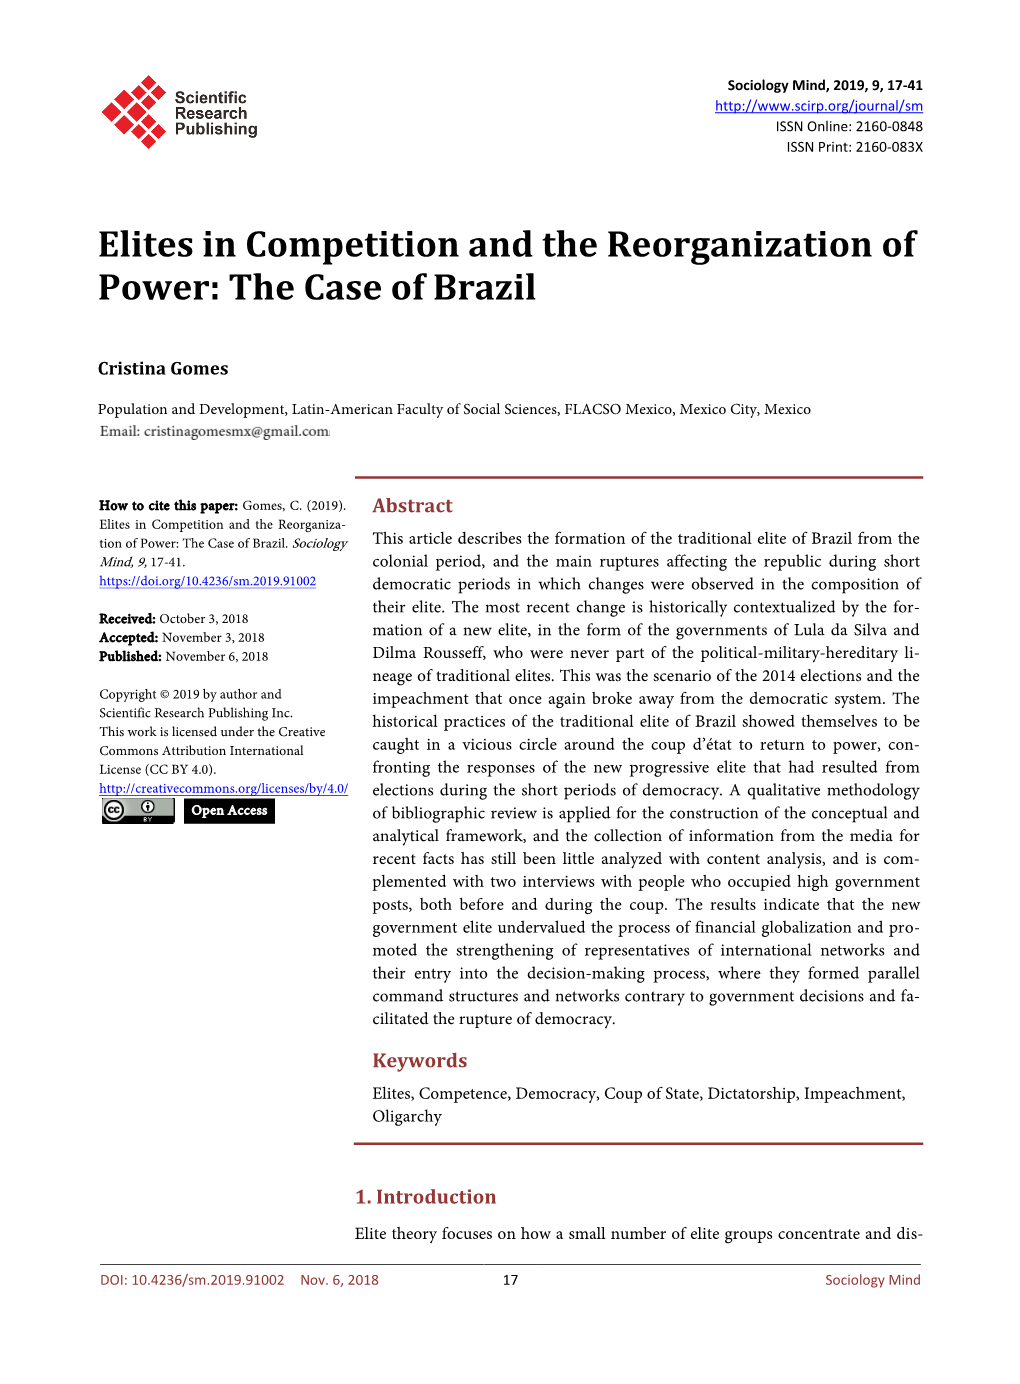 Elites in Competition and the Reorganization of Power: the Case of Brazil